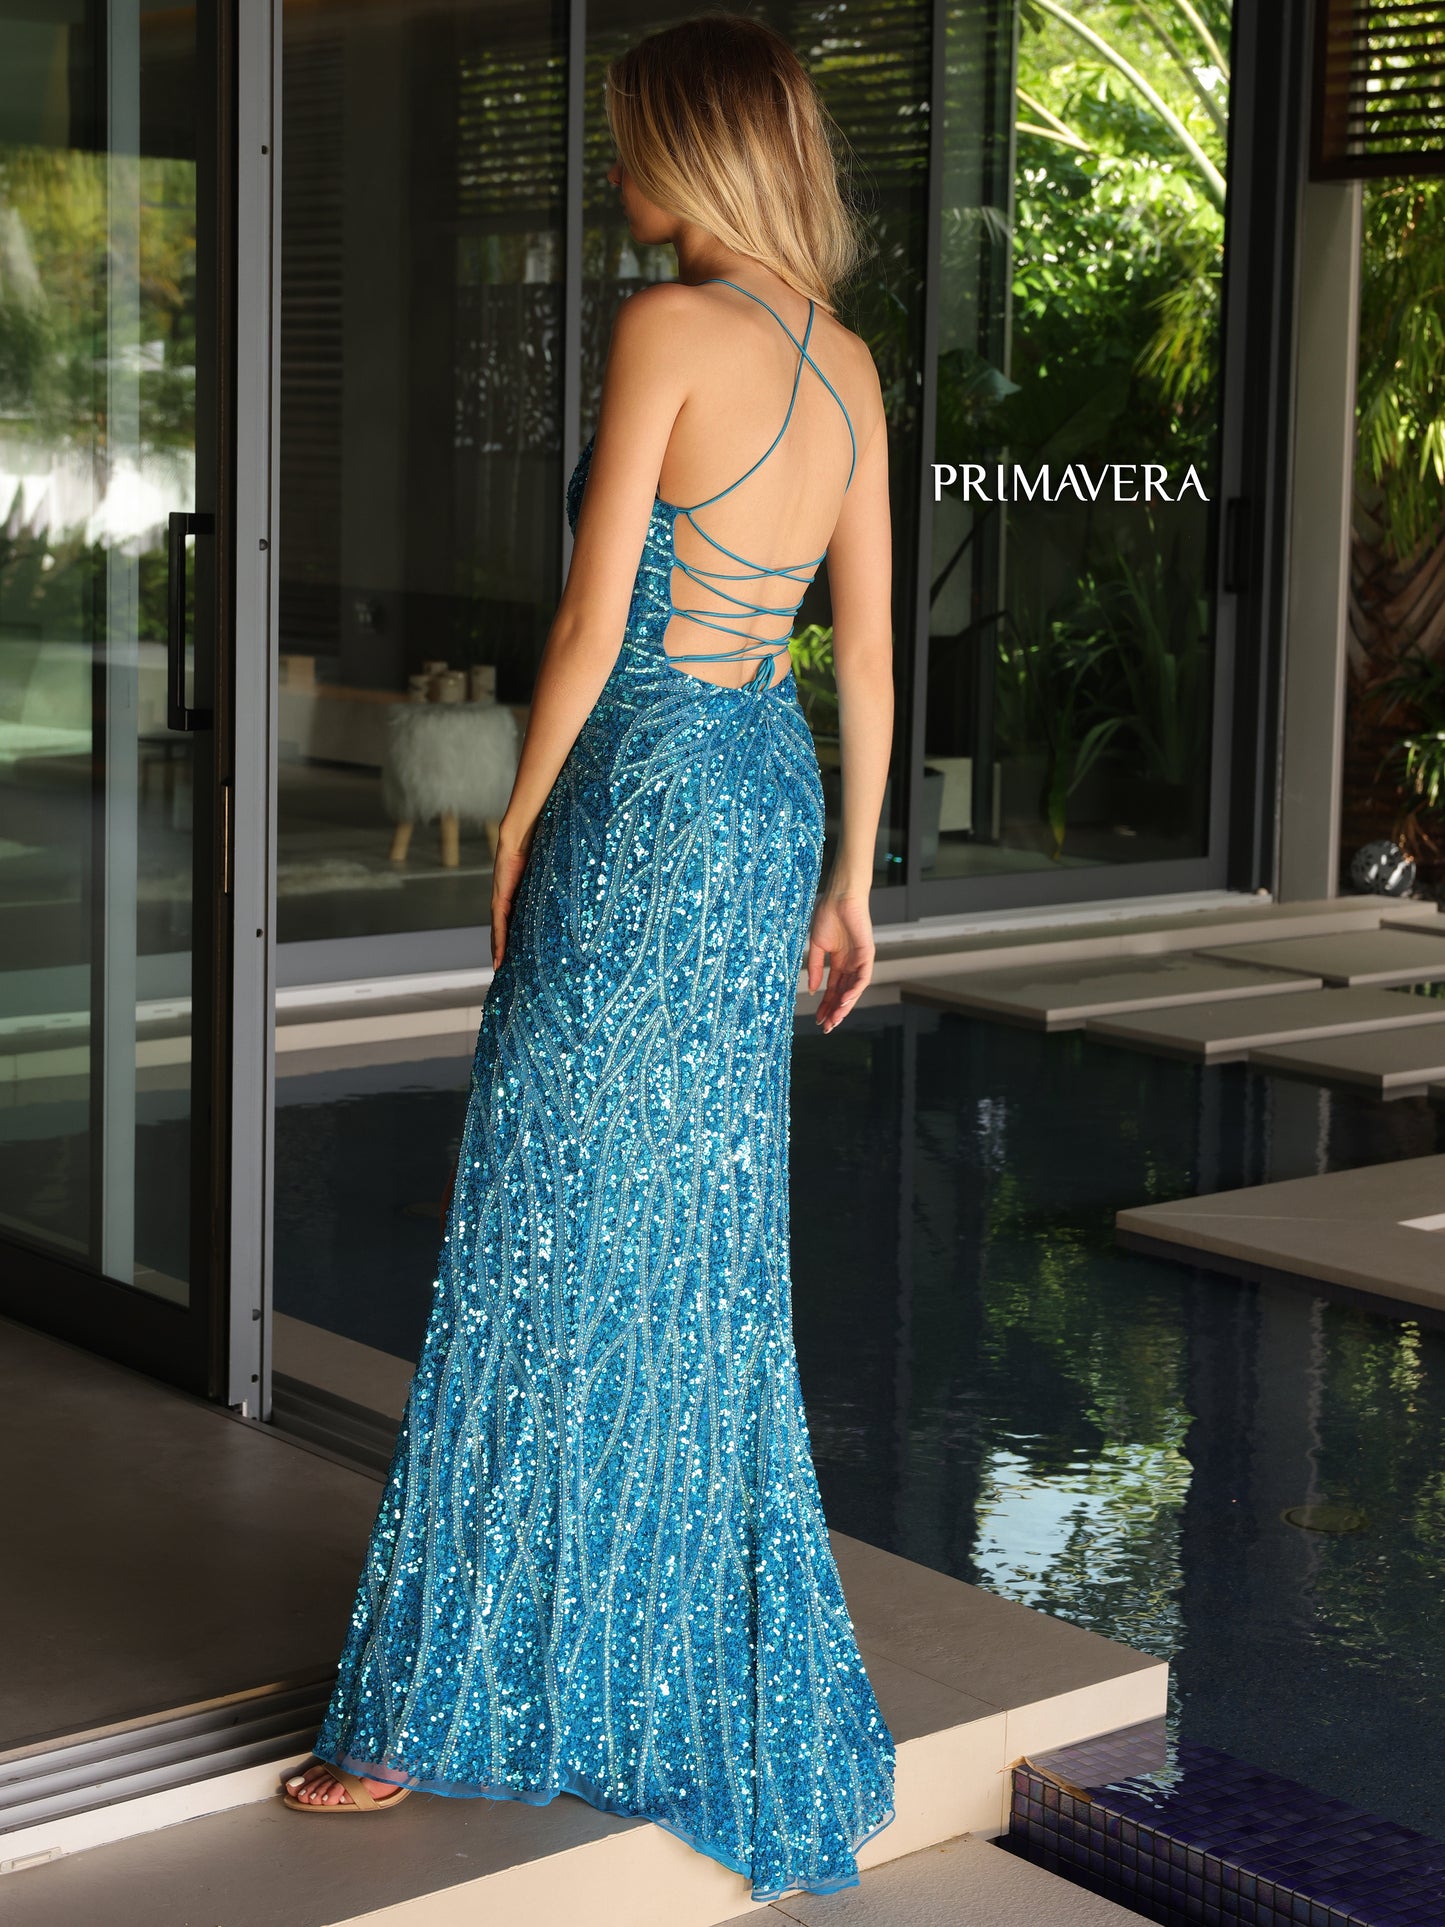 Primavera Couture 3959 Prom Dress Long Beaded Gown. This Gown has a beautiful design all over. Primavera Couture 3959 Sequin Scoop neck Prom Dress Backless Corset Slit Formal Gown  Size-000-18  Colors-Lilac, Coral, Fuchsia, Jade, Peacock, Purple 